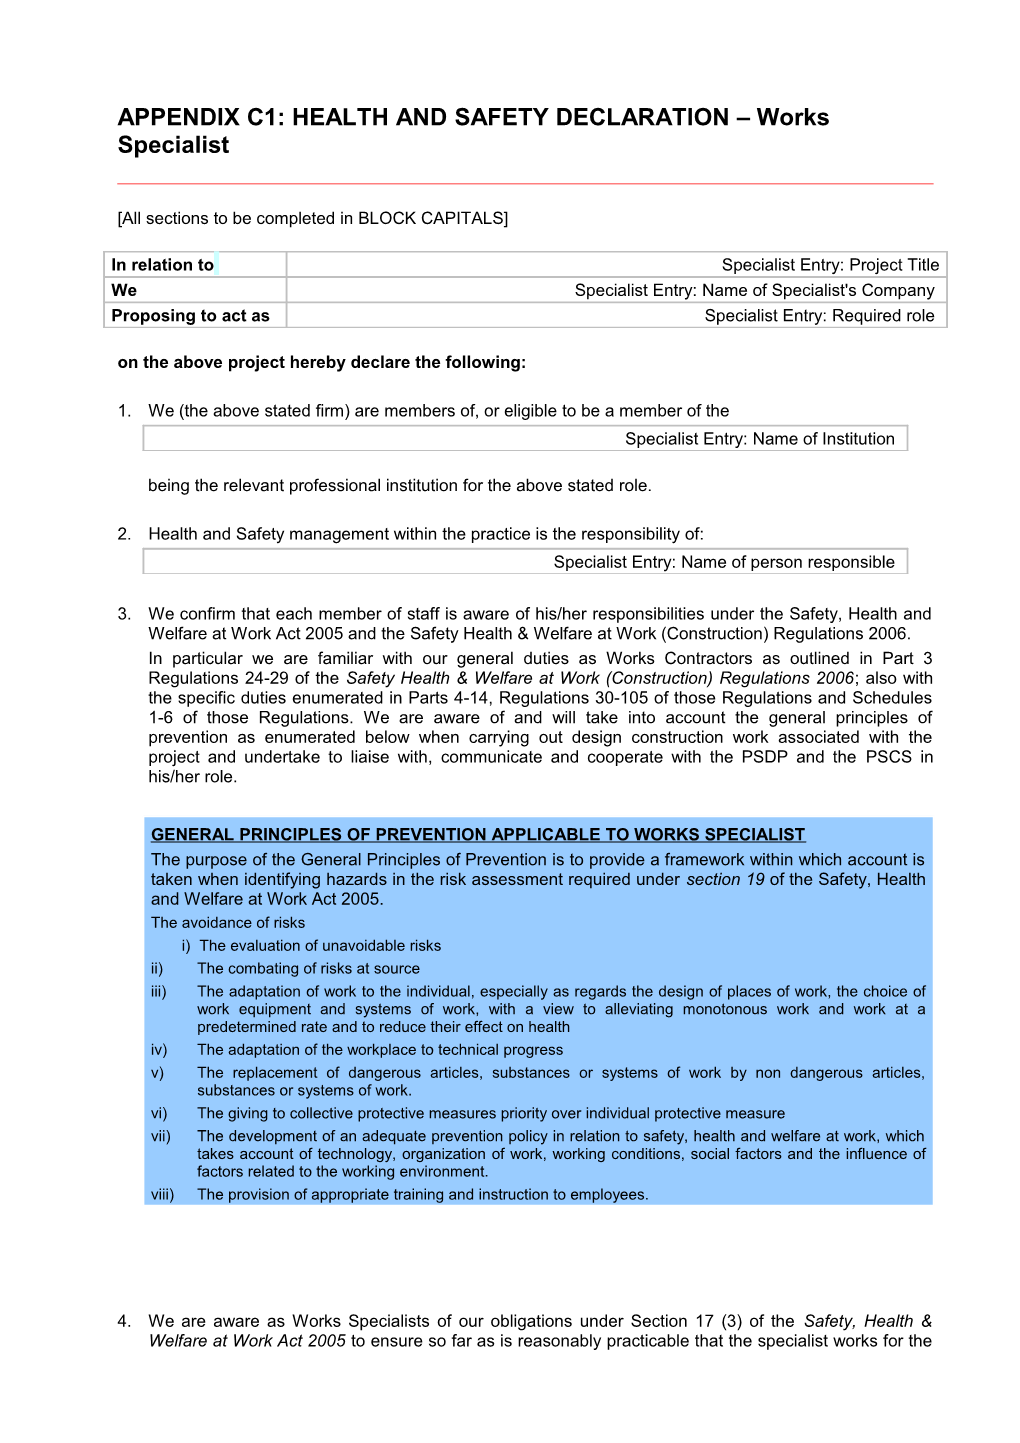 APPENDIX C1: HEALTH and SAFETY DECLARATION Works Specialist